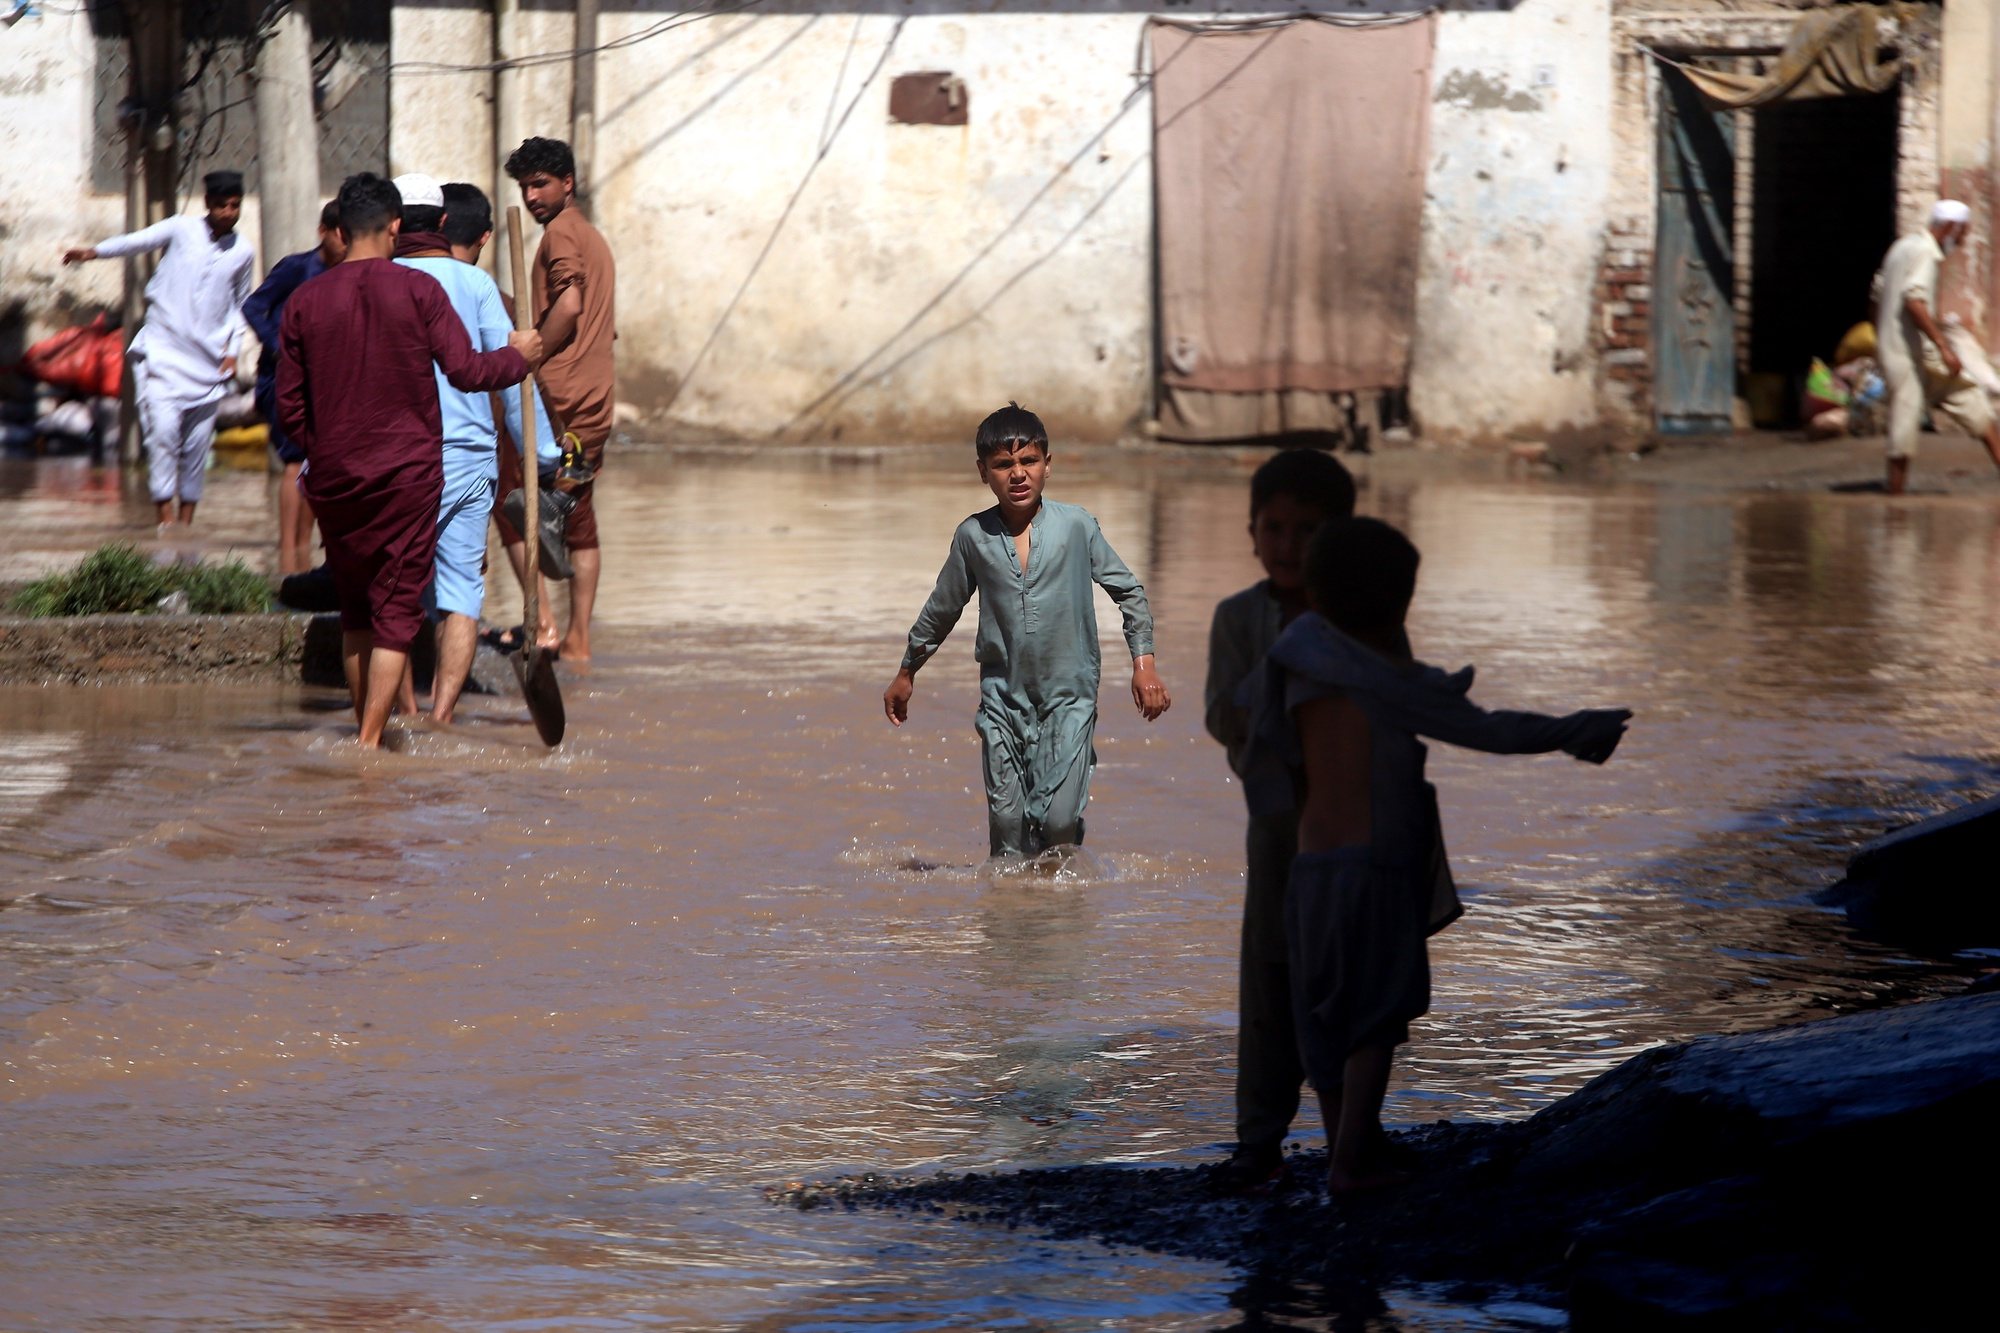 epa11282110 People wade through a flooded street after heavy rain in Charsadda District, Khyber Pakhtunkhwa province, Pakistan, 16 April 2024. Pakistan&#039;s southwest region has been in the grip of heavy rainfall for days, with at least 39 people reported dead. Among the victims were farmers struck by lightning while working in wheat fields, according to authorities. According to the Khyber Pakhtunkhwa (KP) provincial disaster management authority, 32 others have been injured in the last four days due to lightning strikes and incidents related to torrential rains affecting several provinces. Pakistan is among the world&#039;s top 10 countries most-affected by climate change.  EPA/BILAWAL ARBAB